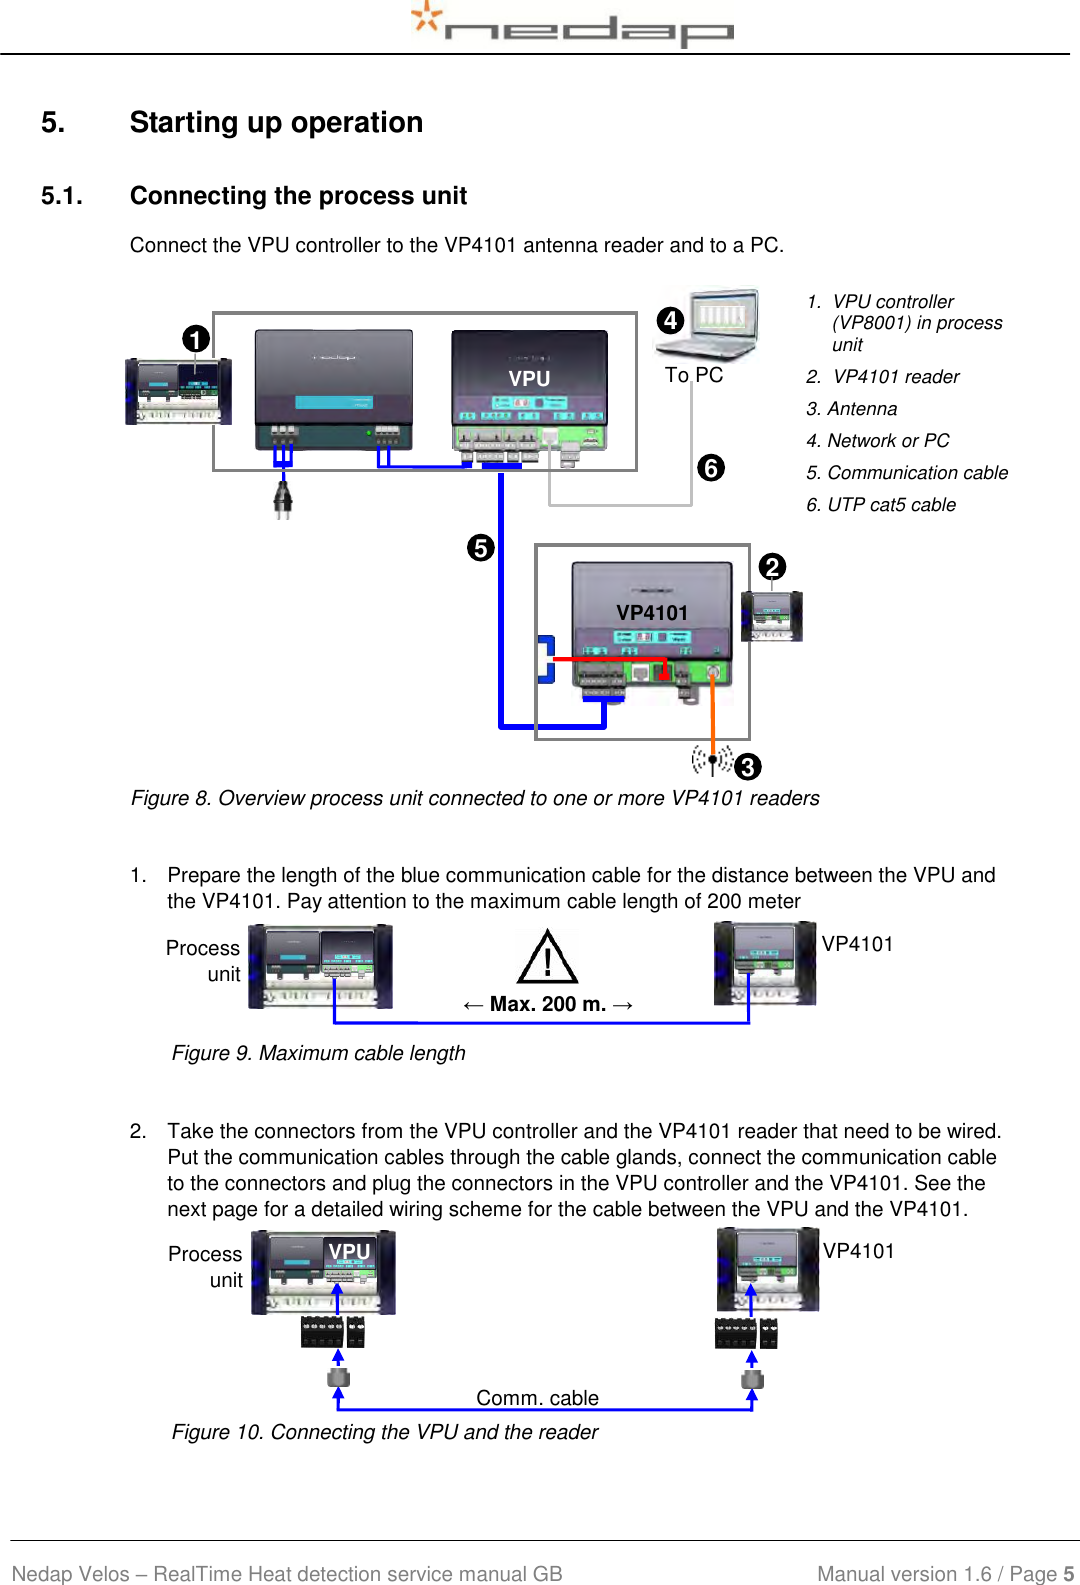  Nedap Velos – RealTime Heat detection service manual GB                            Manual version 1.6 / Page 5  5.  Starting up operation 5.1.  Connecting the process unit Connect the VPU controller to the VP4101 antenna reader and to a PC.            1.  VPU controller (VP8001) in process unit 2.  VP4101 reader 3. Antenna 4. Network or PC 5. Communication cable 6. UTP cat5 cable   Figure 8. Overview process unit connected to one or more VP4101 readers  1.  Prepare the length of the blue communication cable for the distance between the VPU and the VP4101. Pay attention to the maximum cable length of 200 meter   Figure 9. Maximum cable length  2.  Take the connectors from the VPU controller and the VP4101 reader that need to be wired. Put the communication cables through the cable glands, connect the communication cable to the connectors and plug the connectors in the VPU controller and the VP4101. See the next page for a detailed wiring scheme for the cable between the VPU and the VP4101.     Figure 10. Connecting the VPU and the reader Process unit ← Max. 200 m. → VP4101  Process unit VP4101 Comm. cable VPU VPU VPU VP4101 To PC   6 Length of corridor (m) 11 Length of corridor (m) 4 Length of corridor (m) 5 Length of corridor (m) 2 Length of corridor (m) 31 Length of corridor (m) 